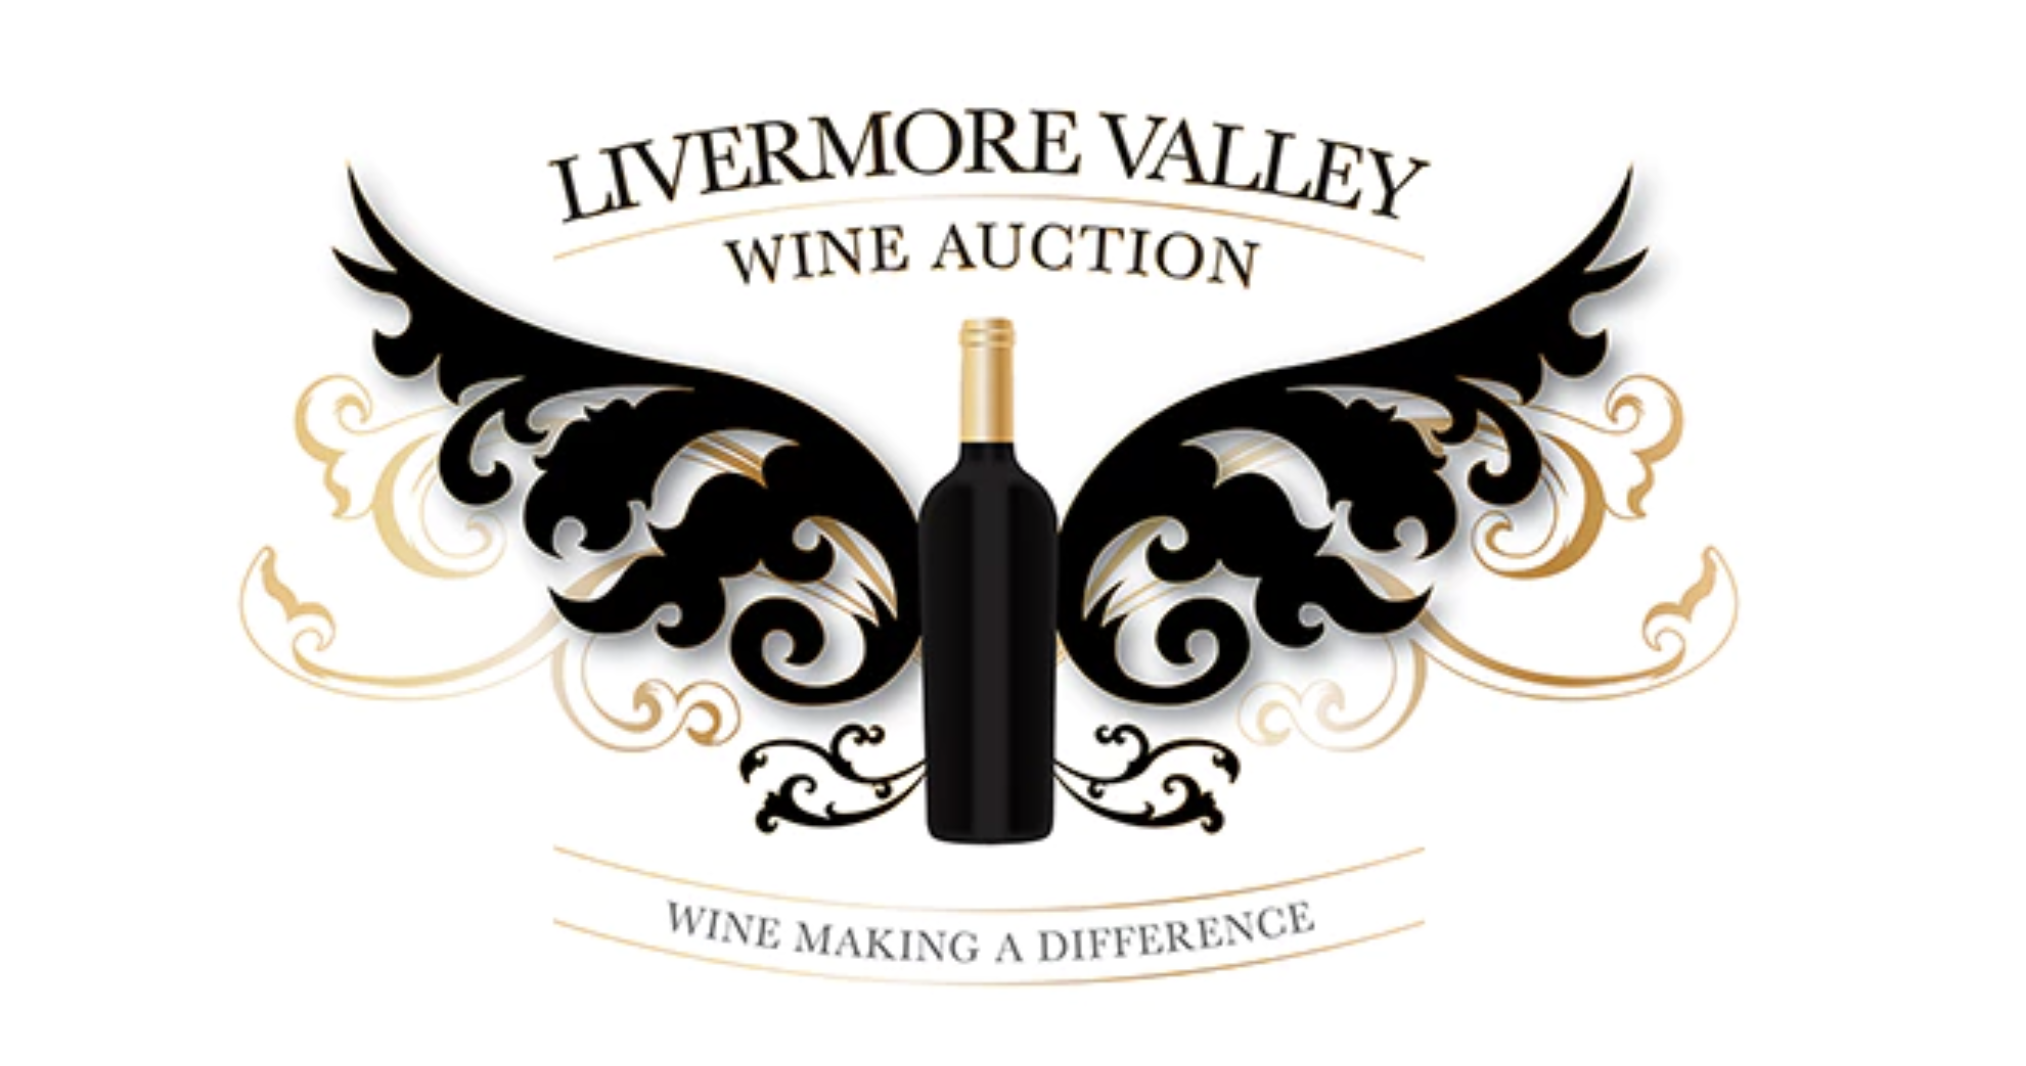 Livermore Valley Wine Auction